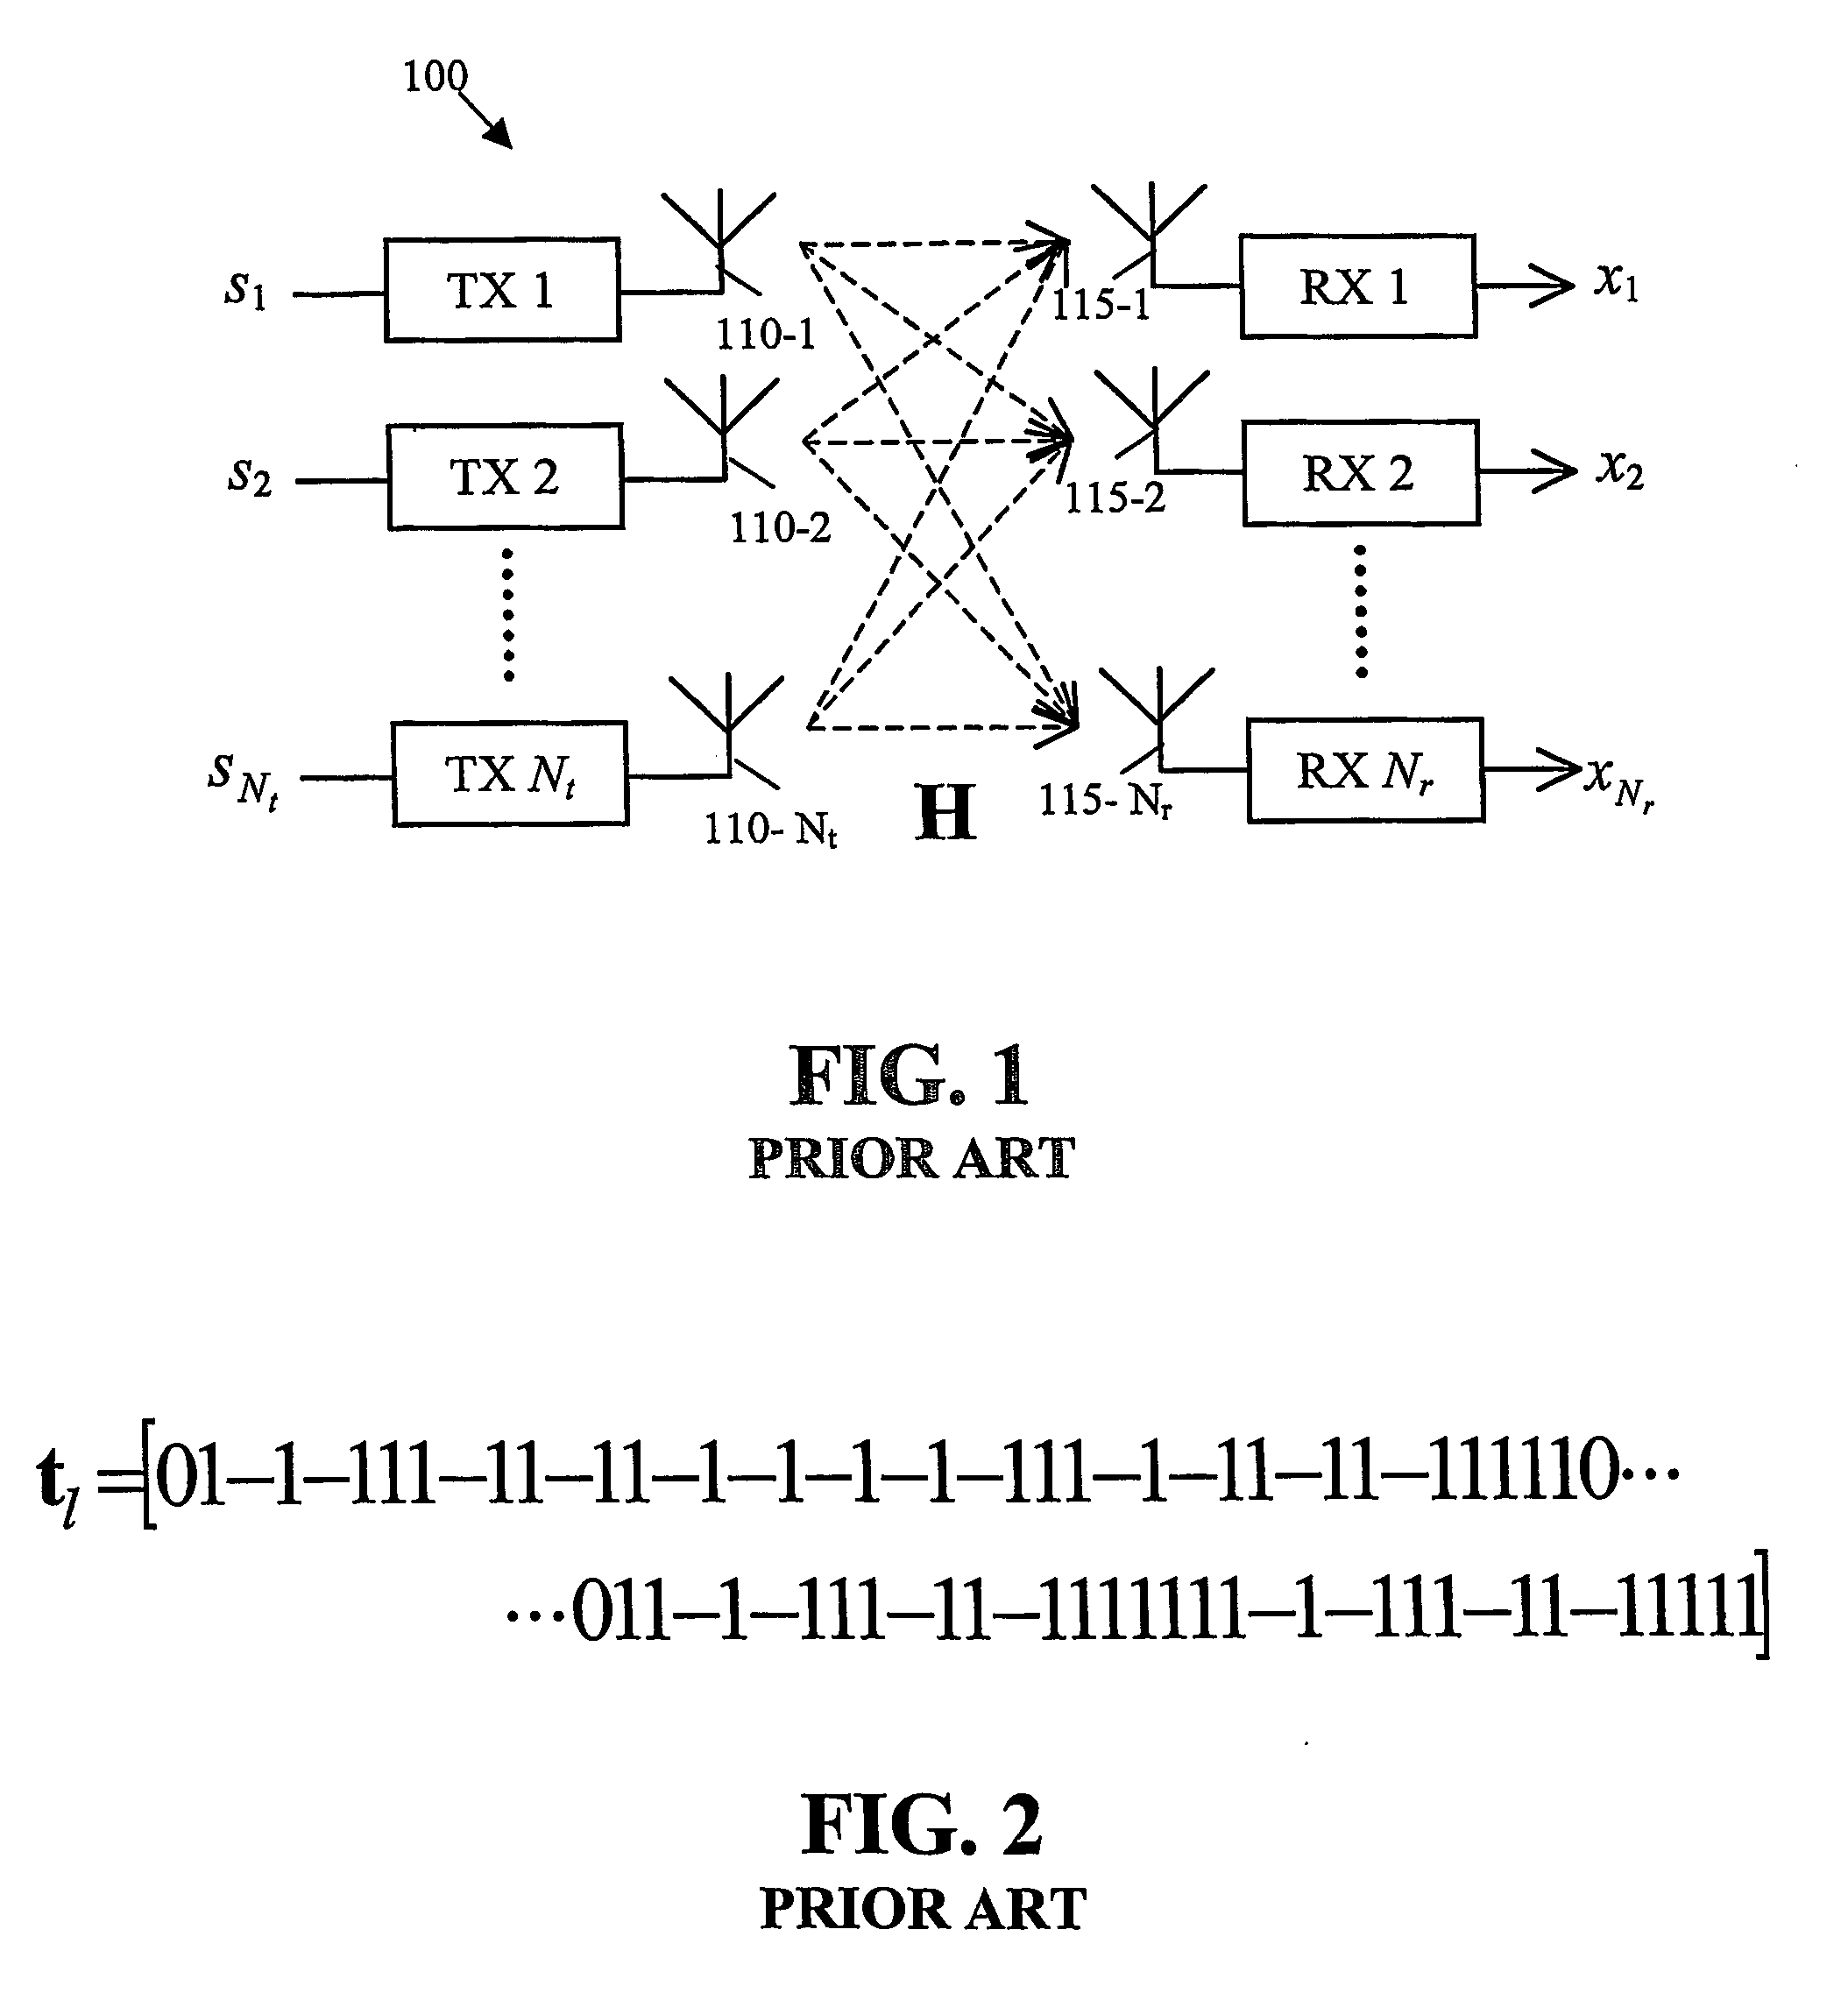 Methods and apparatus for backwards compatible communication in a multiple input multiple output communication system with lower order receivers